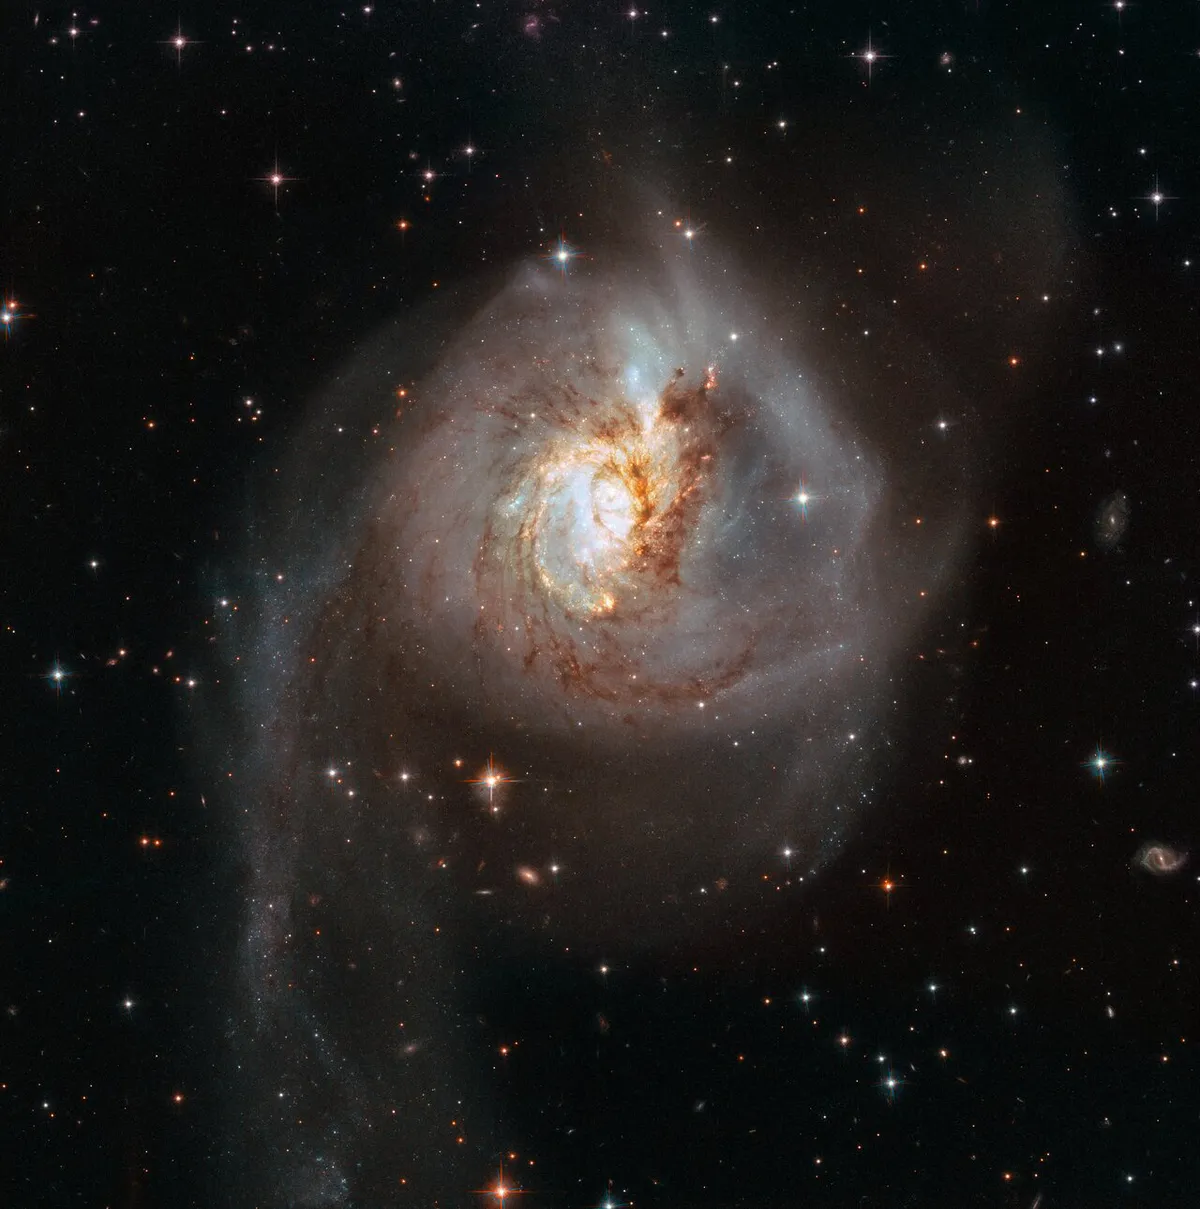 Galaxy NGC 3256, about 100 million lightyears away, formed as a result of a merger of two galaxies. Credit: ESA/Hubble, NASA